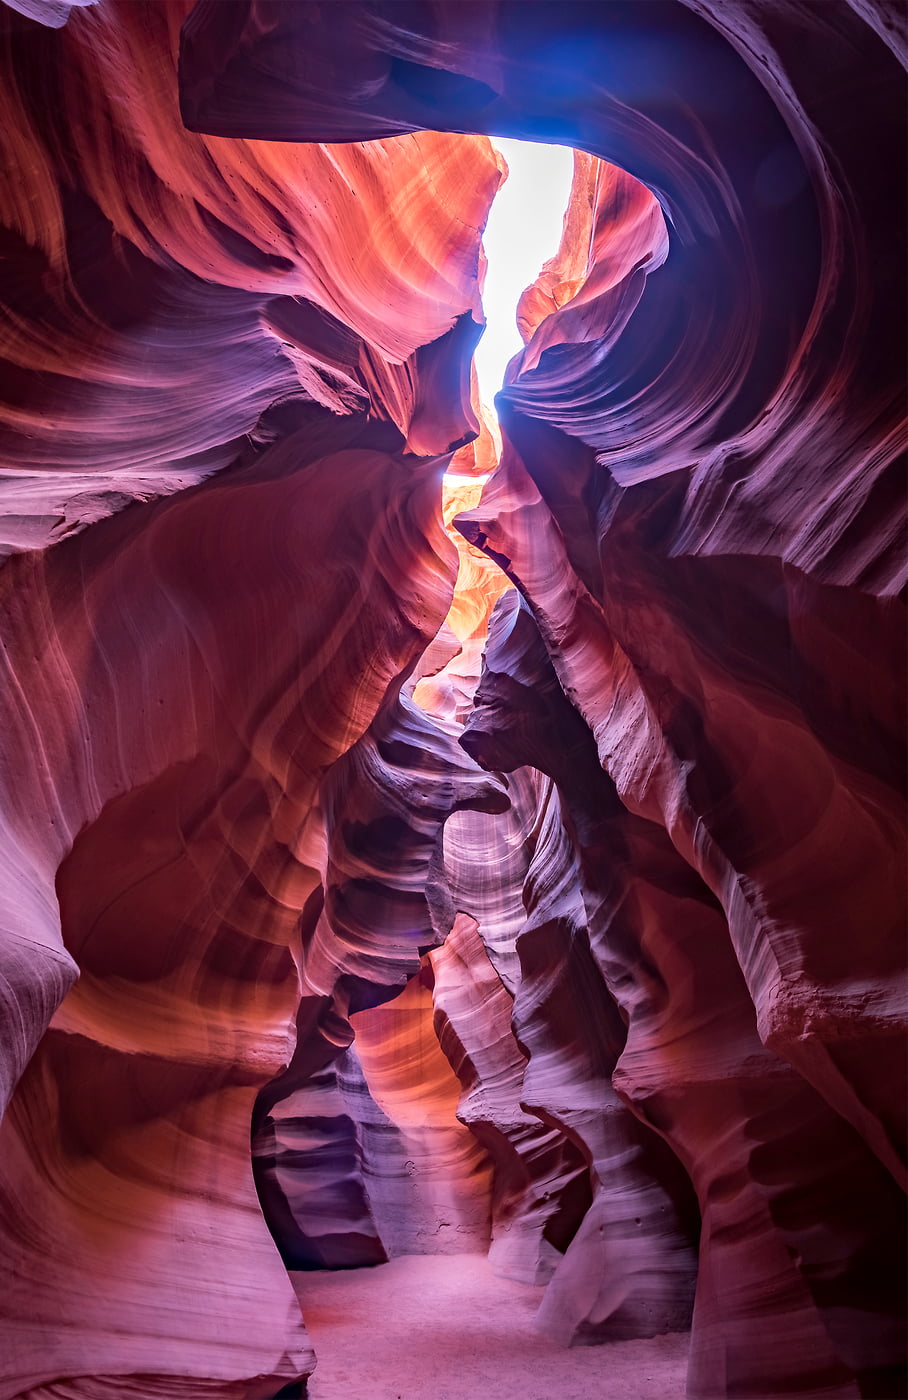 109 megapixels! A very high resolution, large-format VAST photo print of light coming into Antelope Canyon; nature photo created by Justin Katz in Arizona